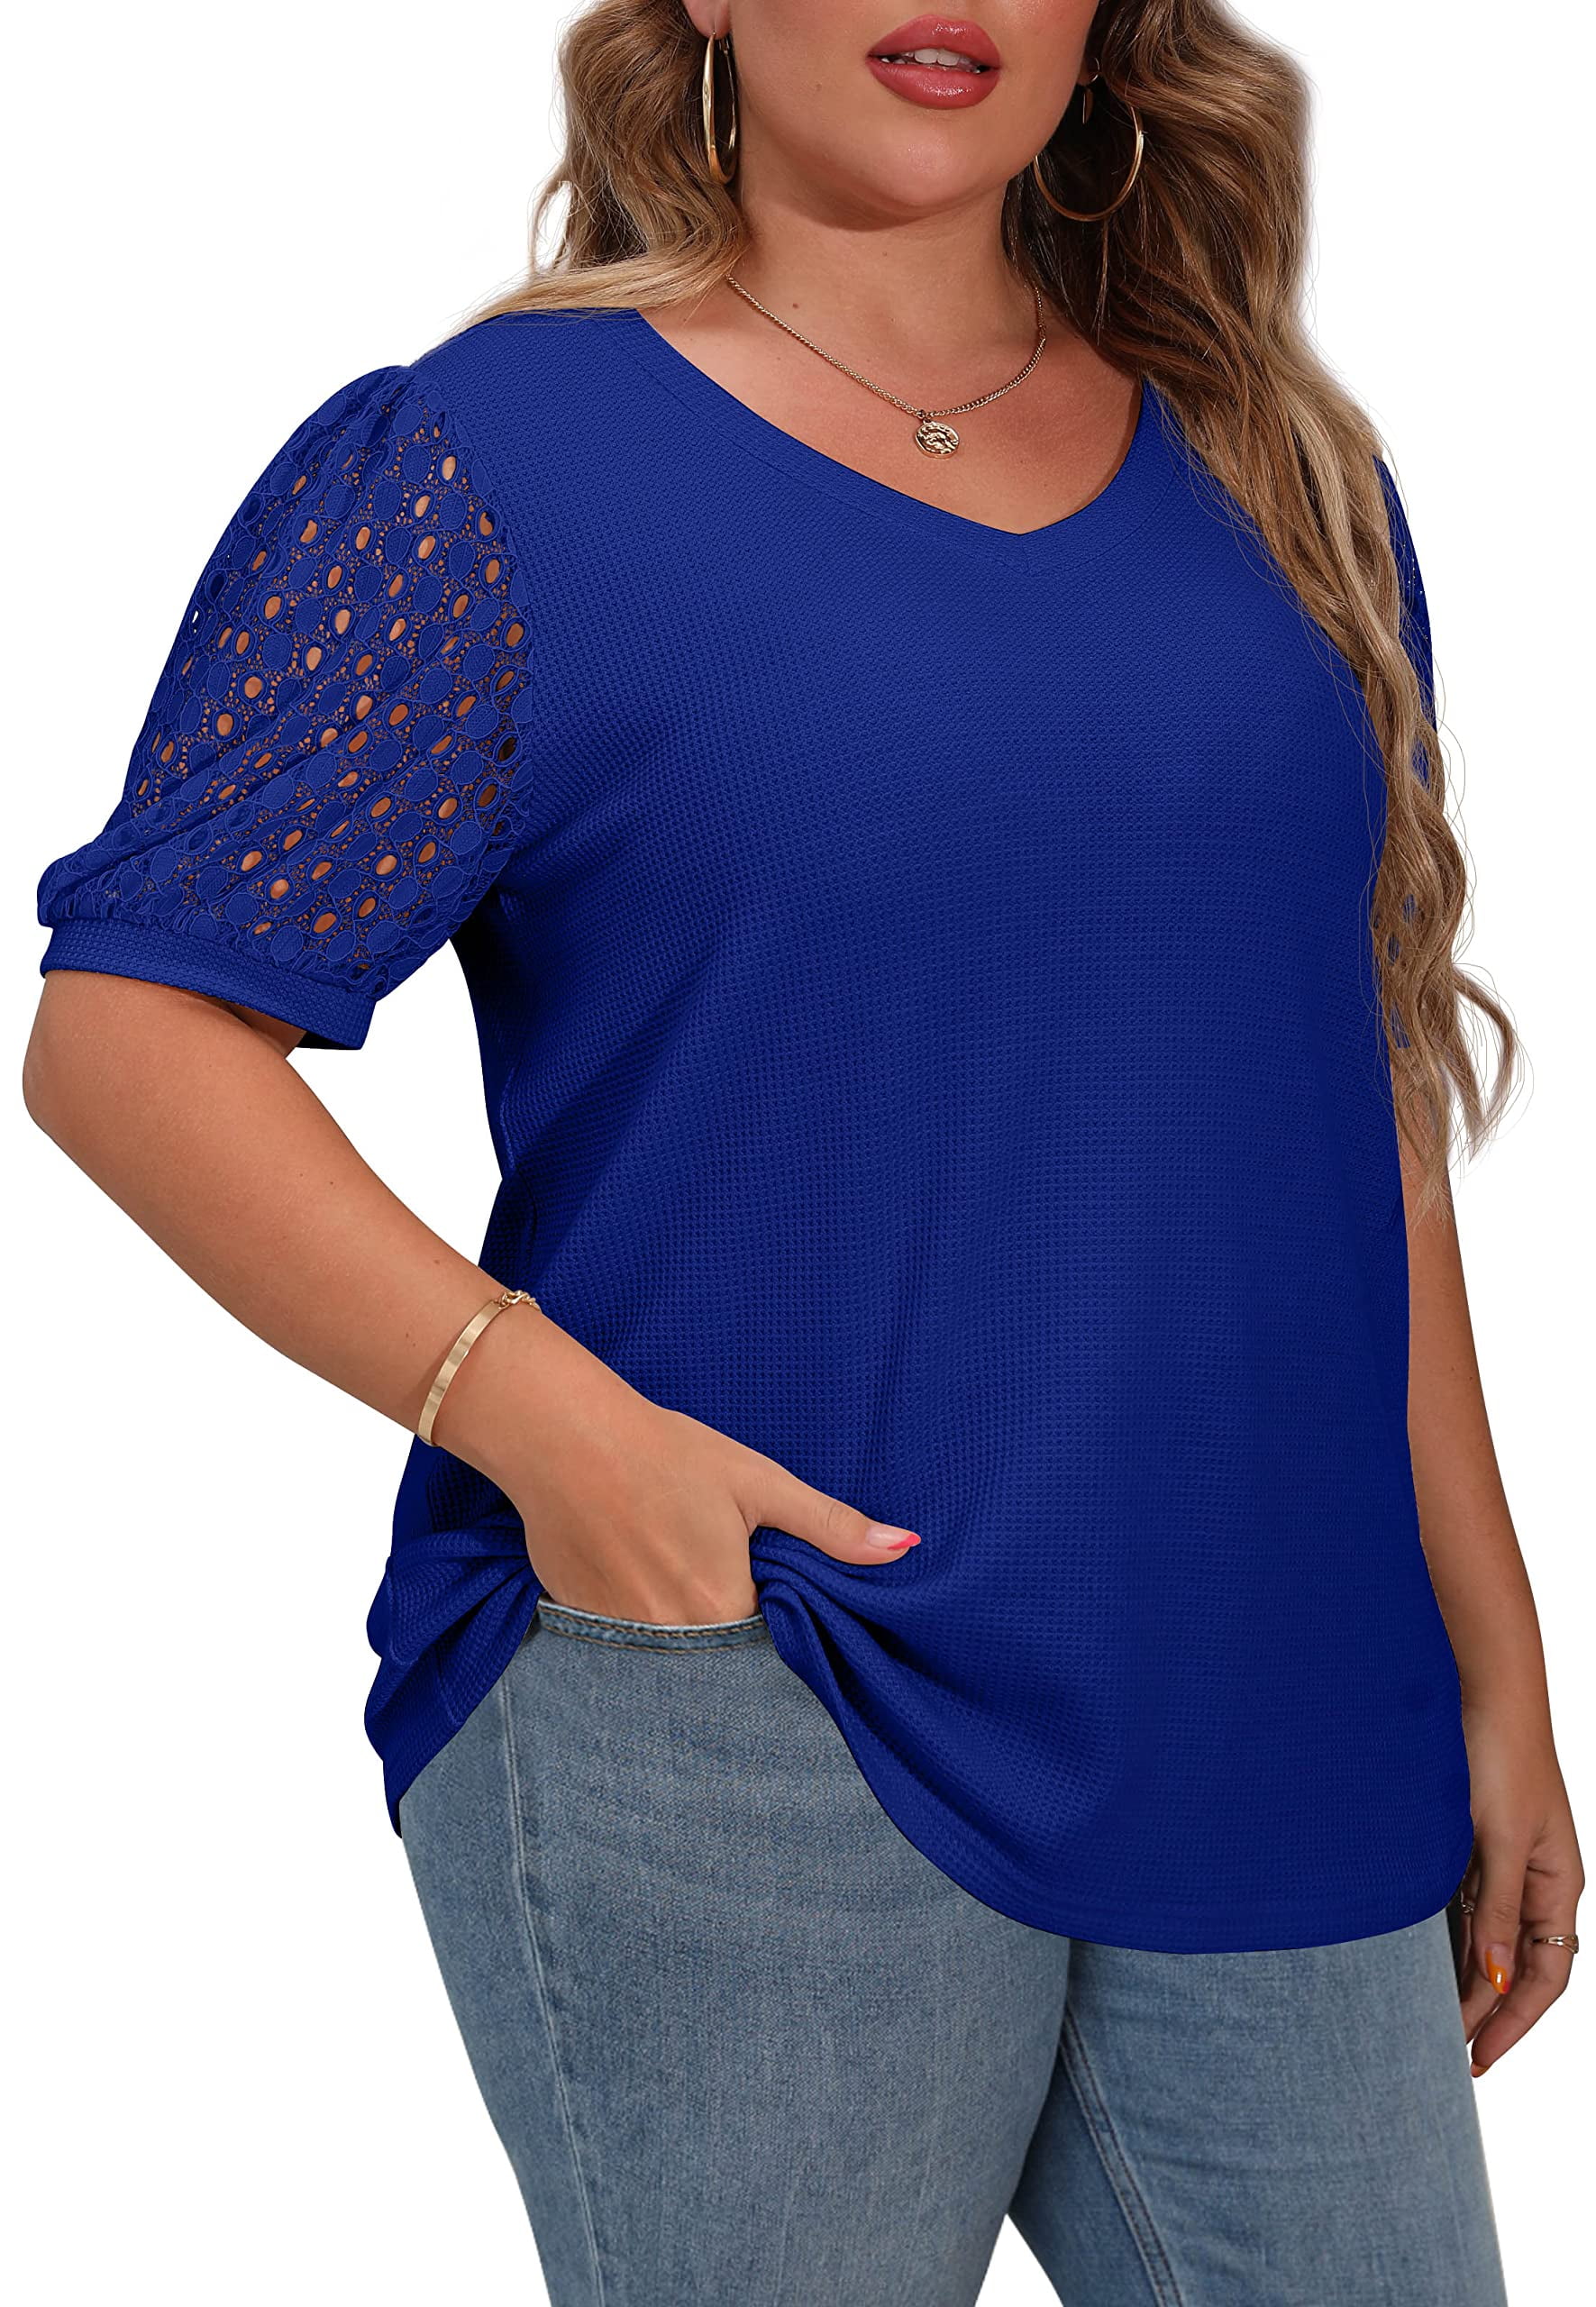  Plus Size Tops For Women Lace Sleeve Blouse Waffle Knit Long  Sleeve Shirts Royal Blue-2X